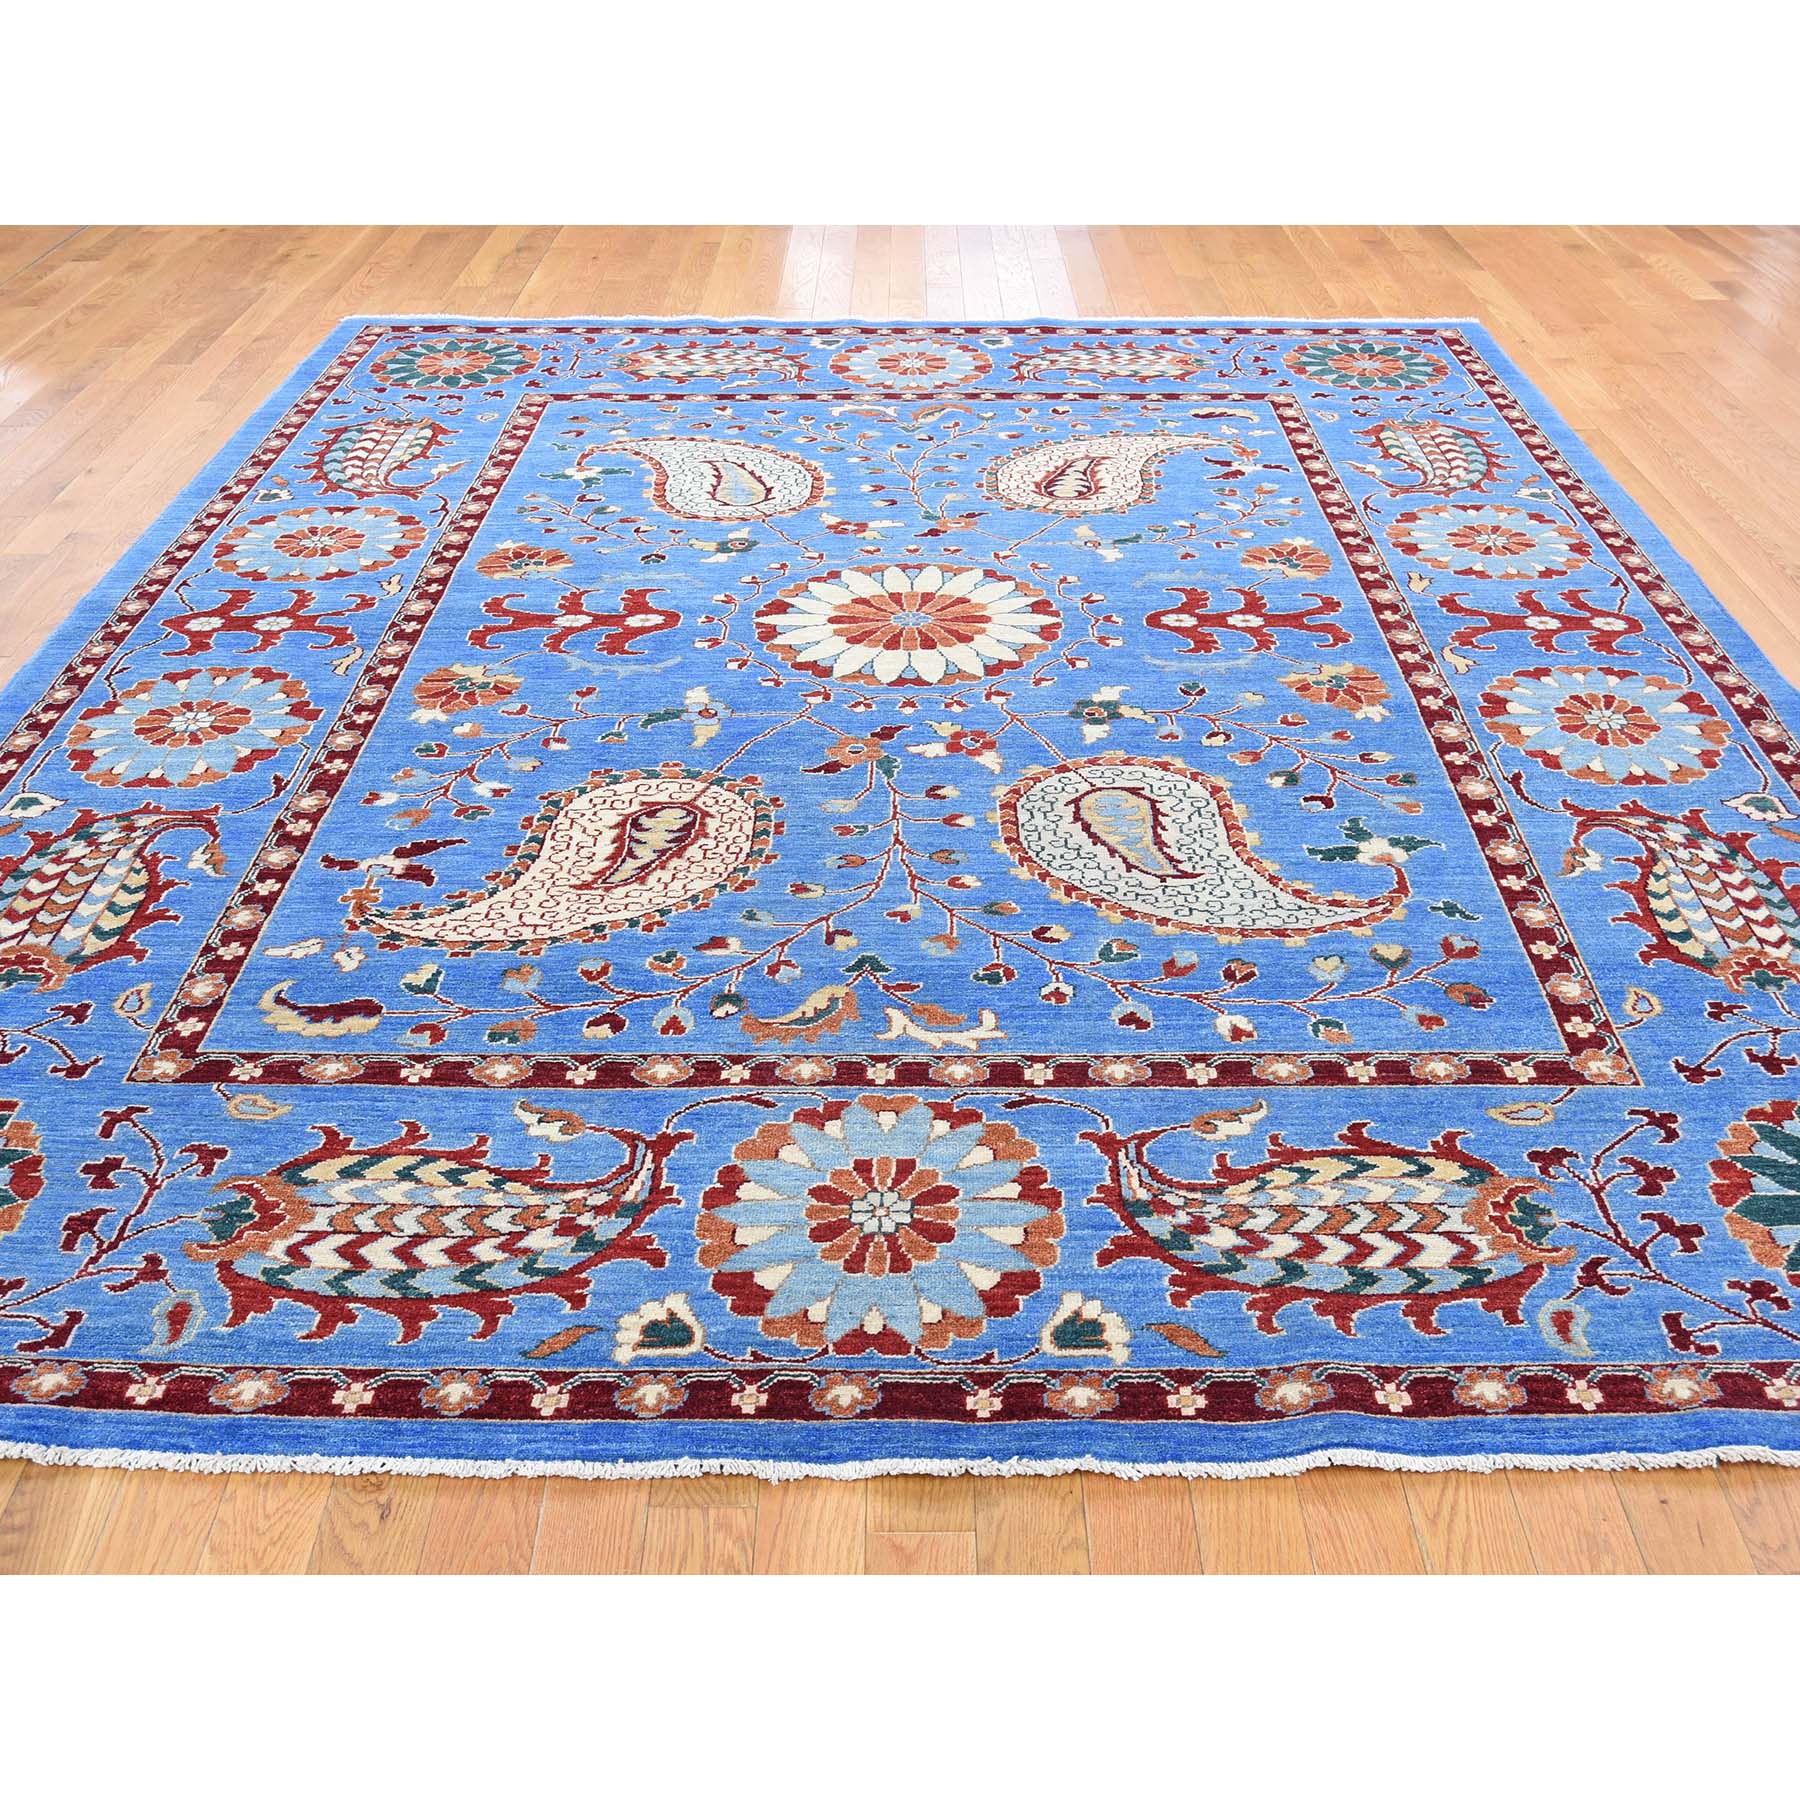 8-2 x10-2  Hand-Knotted Peshawar with Suzani Design Pure Wool Oriental Rug 